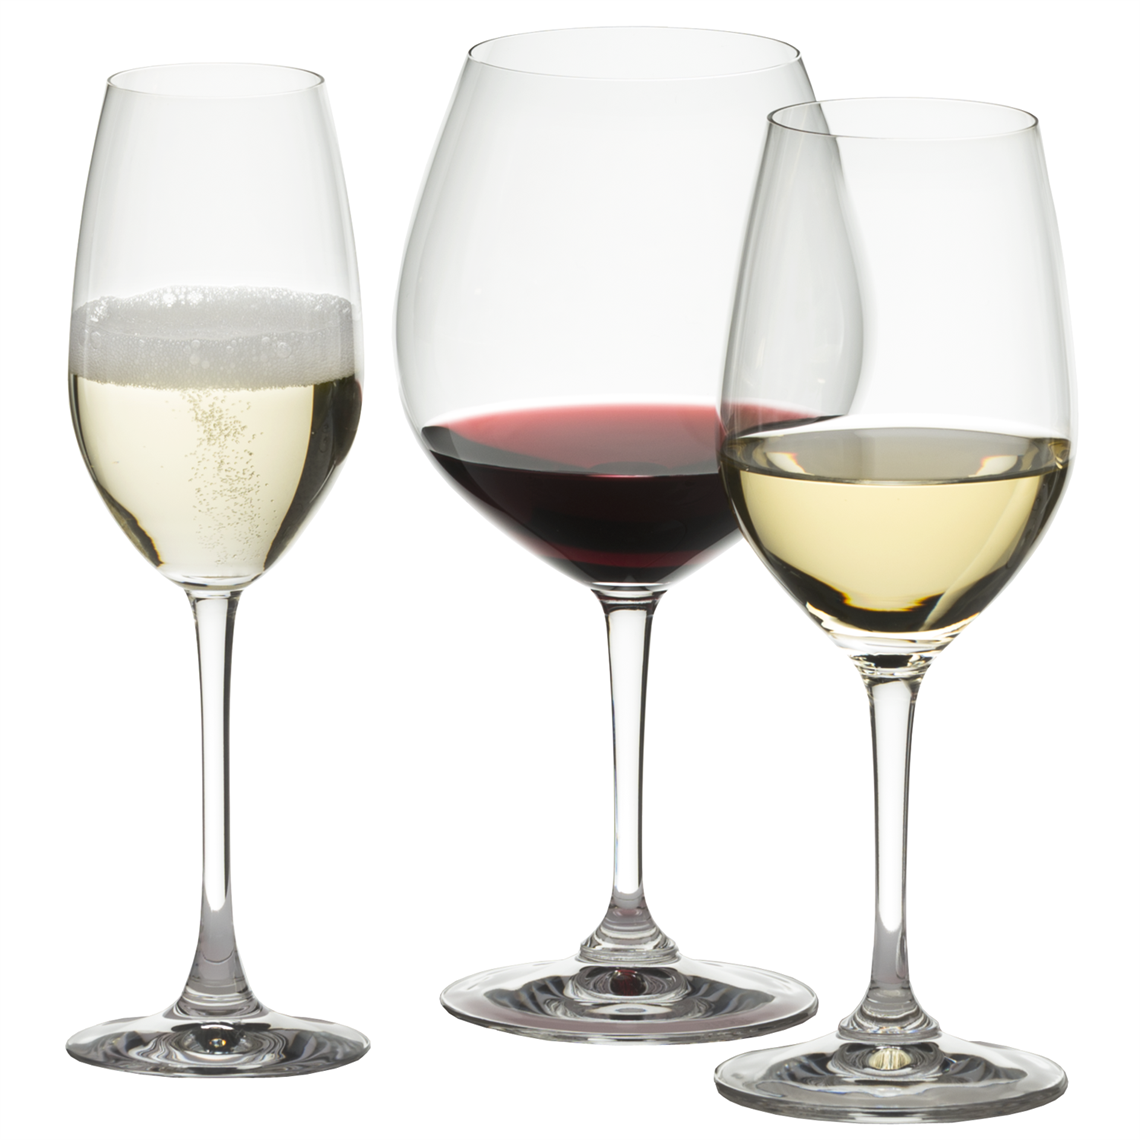 View more cocktail glasses from our Restaurant & Trade Glasses range